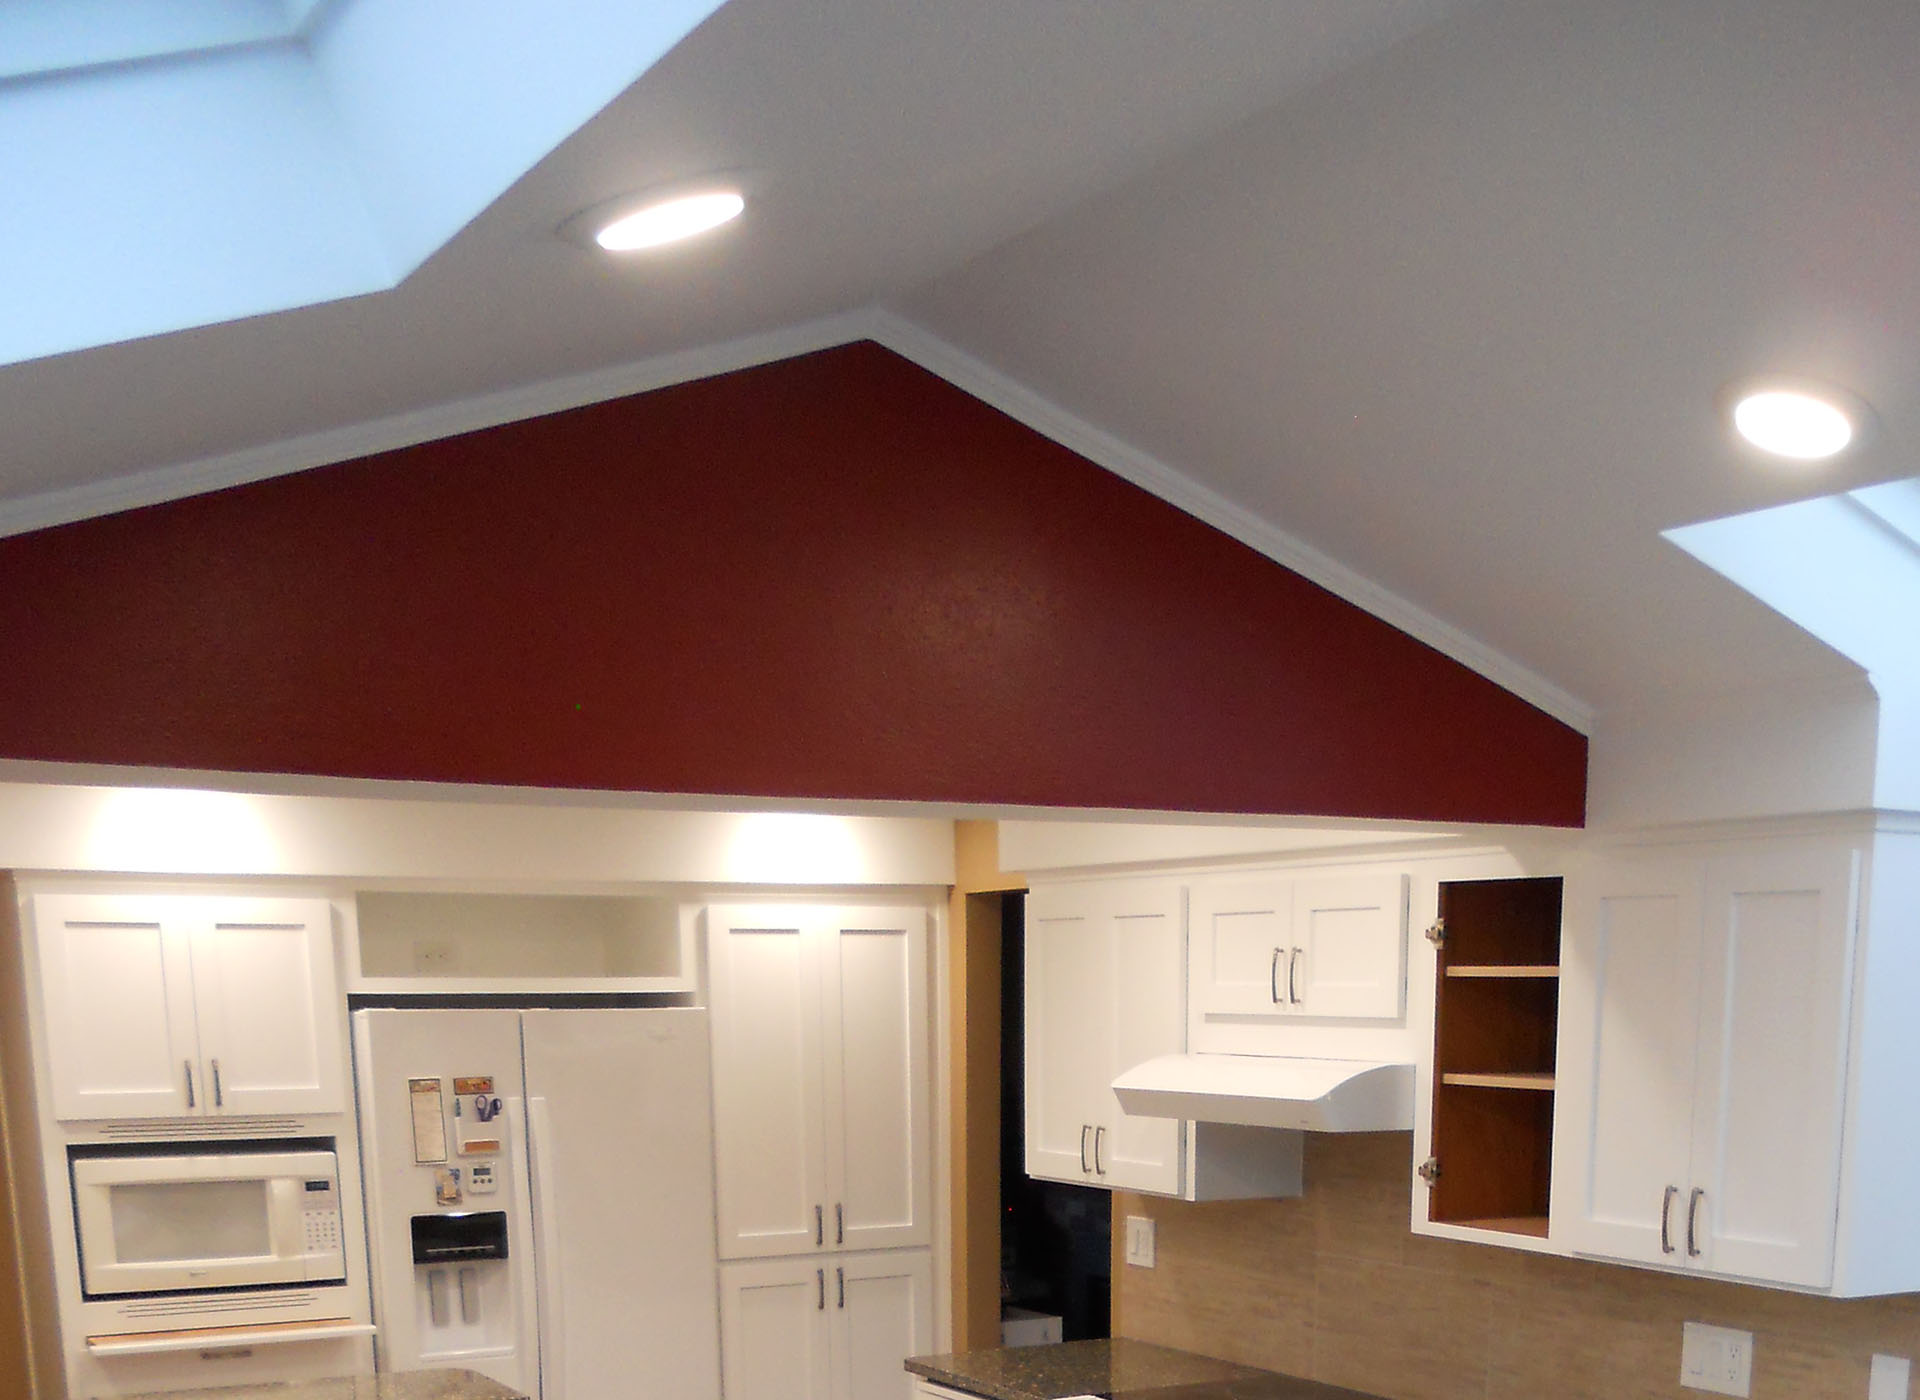 Kitchen Remodel - Red Accent Wall